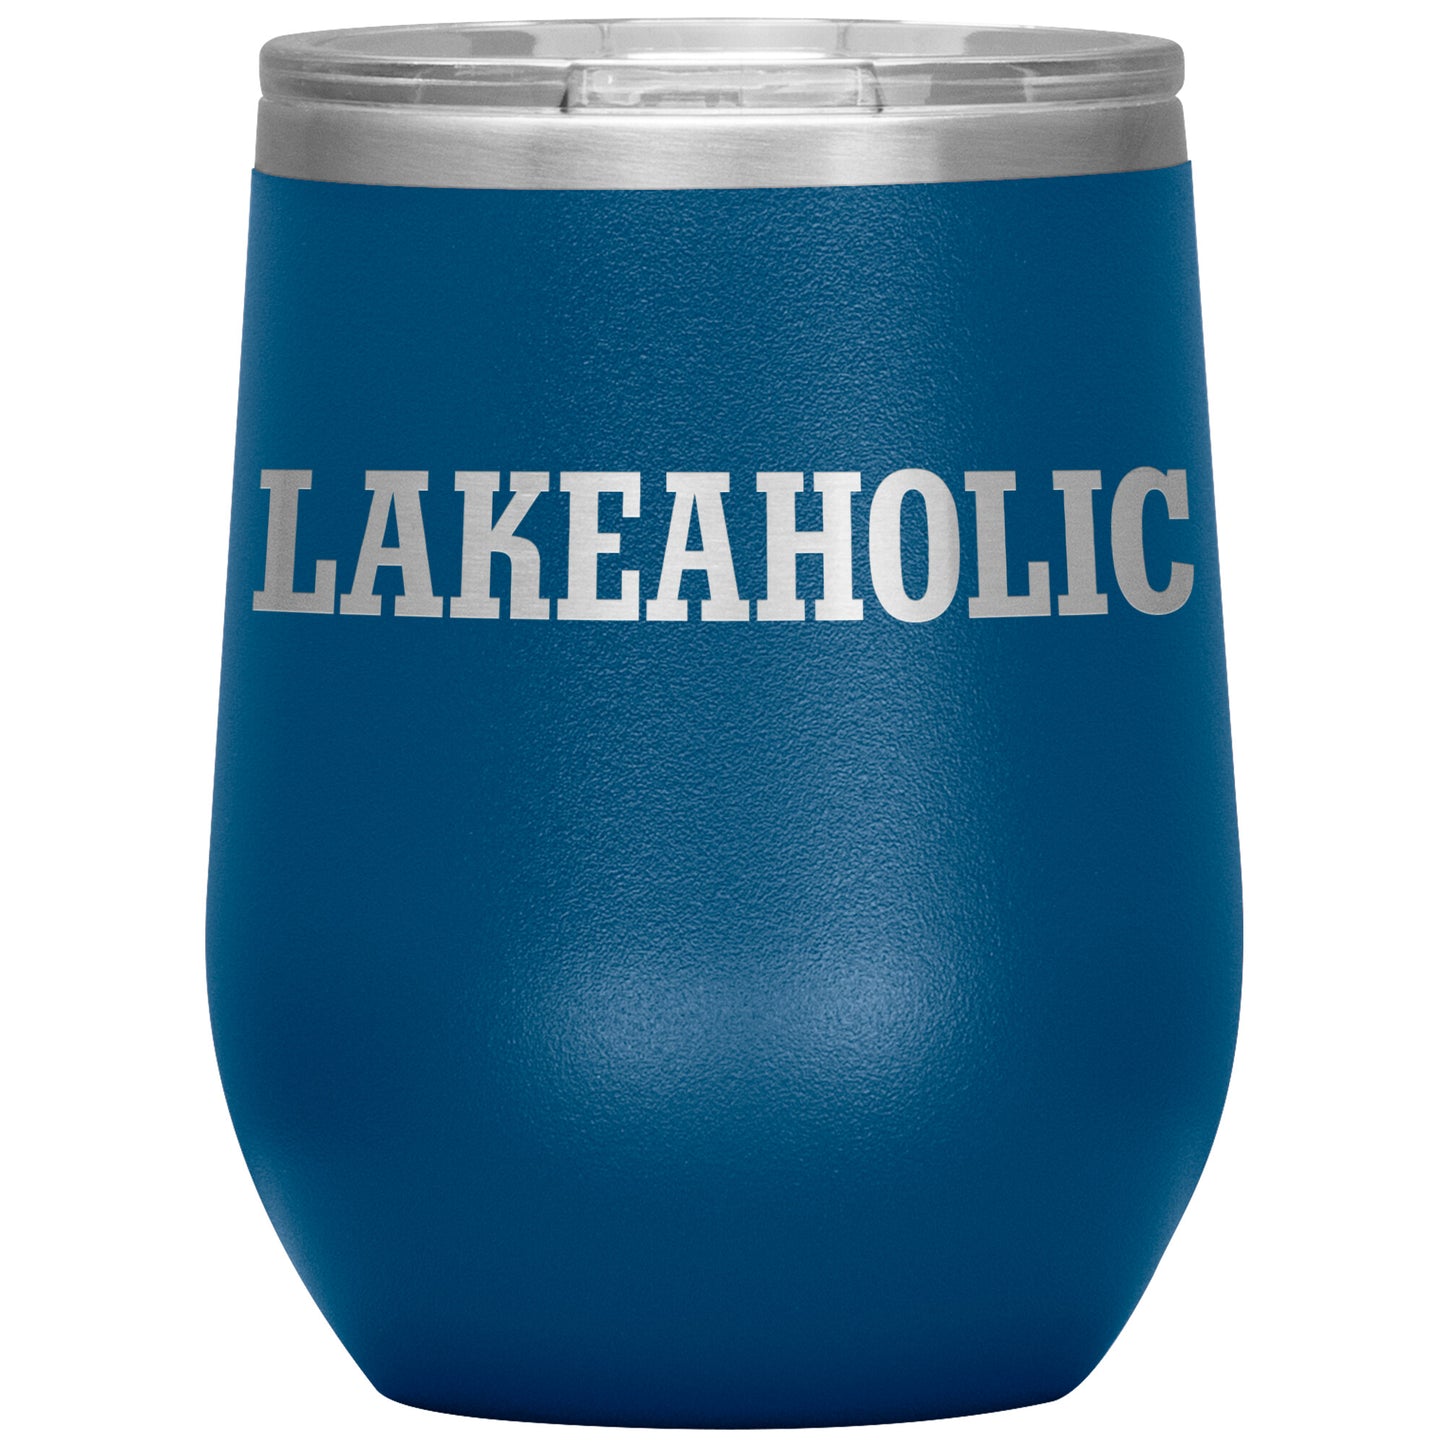 Lakeaholic Funny 12oz Wine Tumbler - Stemless Cup Lake Gift